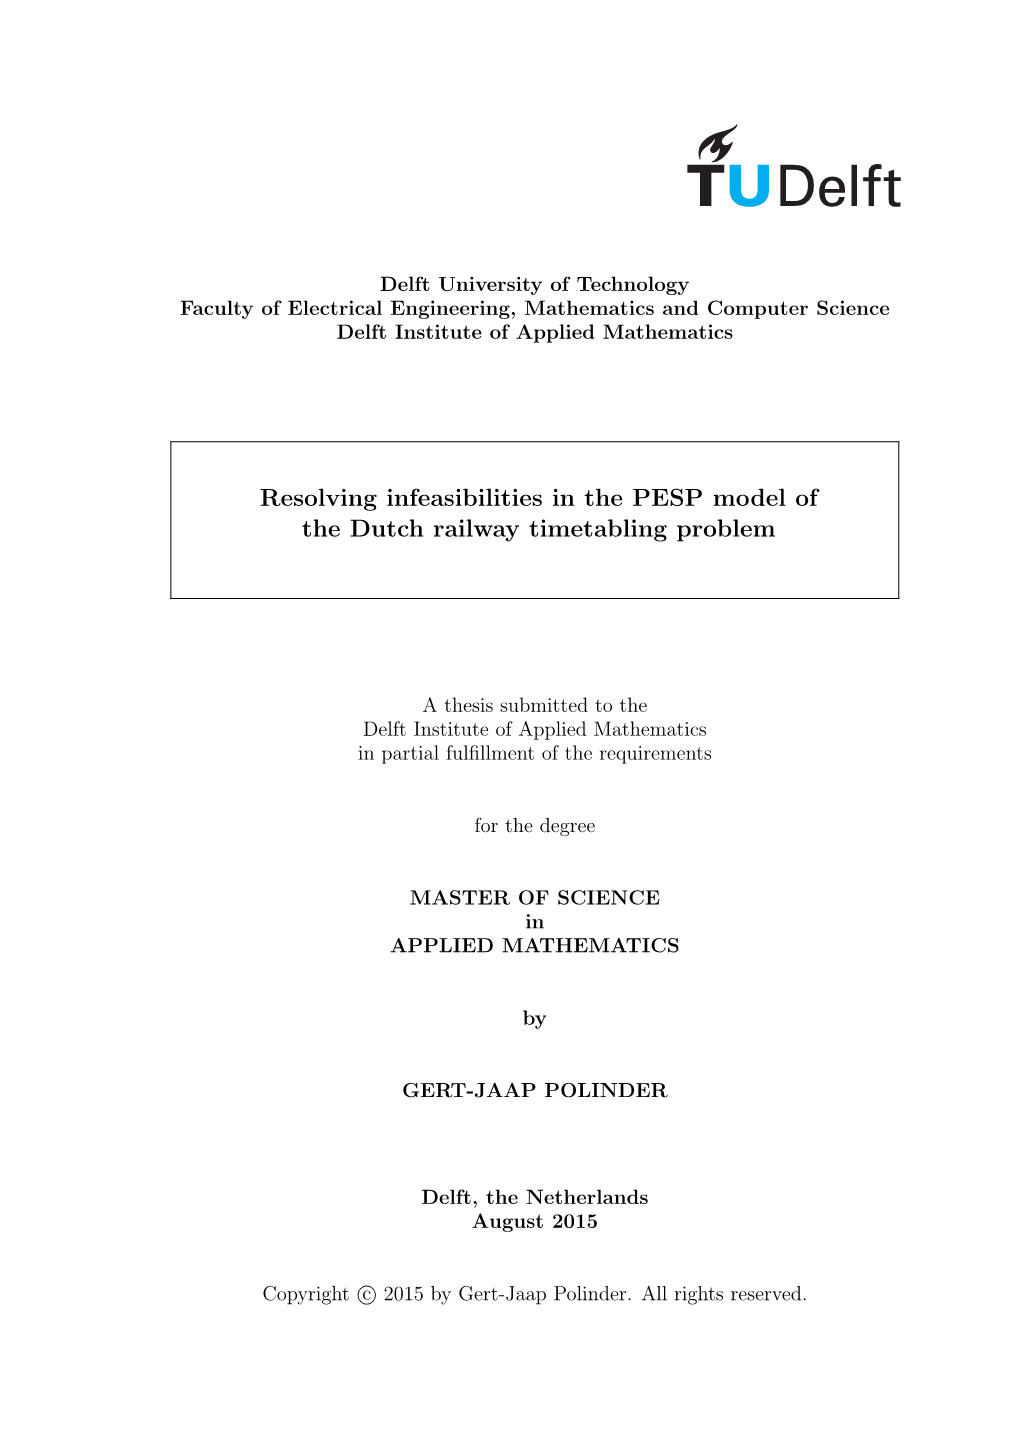 Resolving Infeasibilities in the PESP Model of the Dutch Railway Timetabling Problem